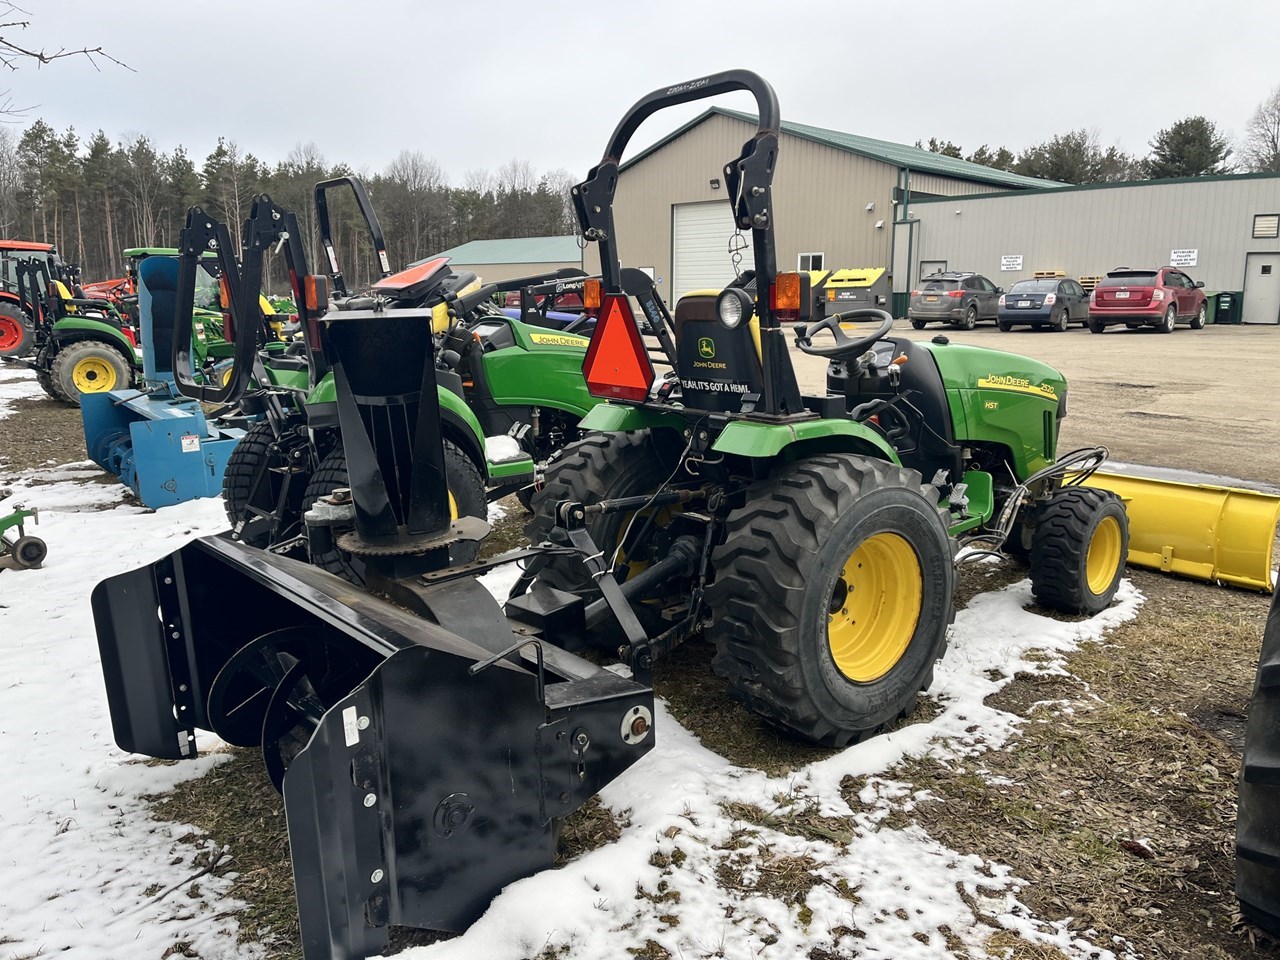 2006 John Deere 2520 Tractor - Compact Utility For Sale